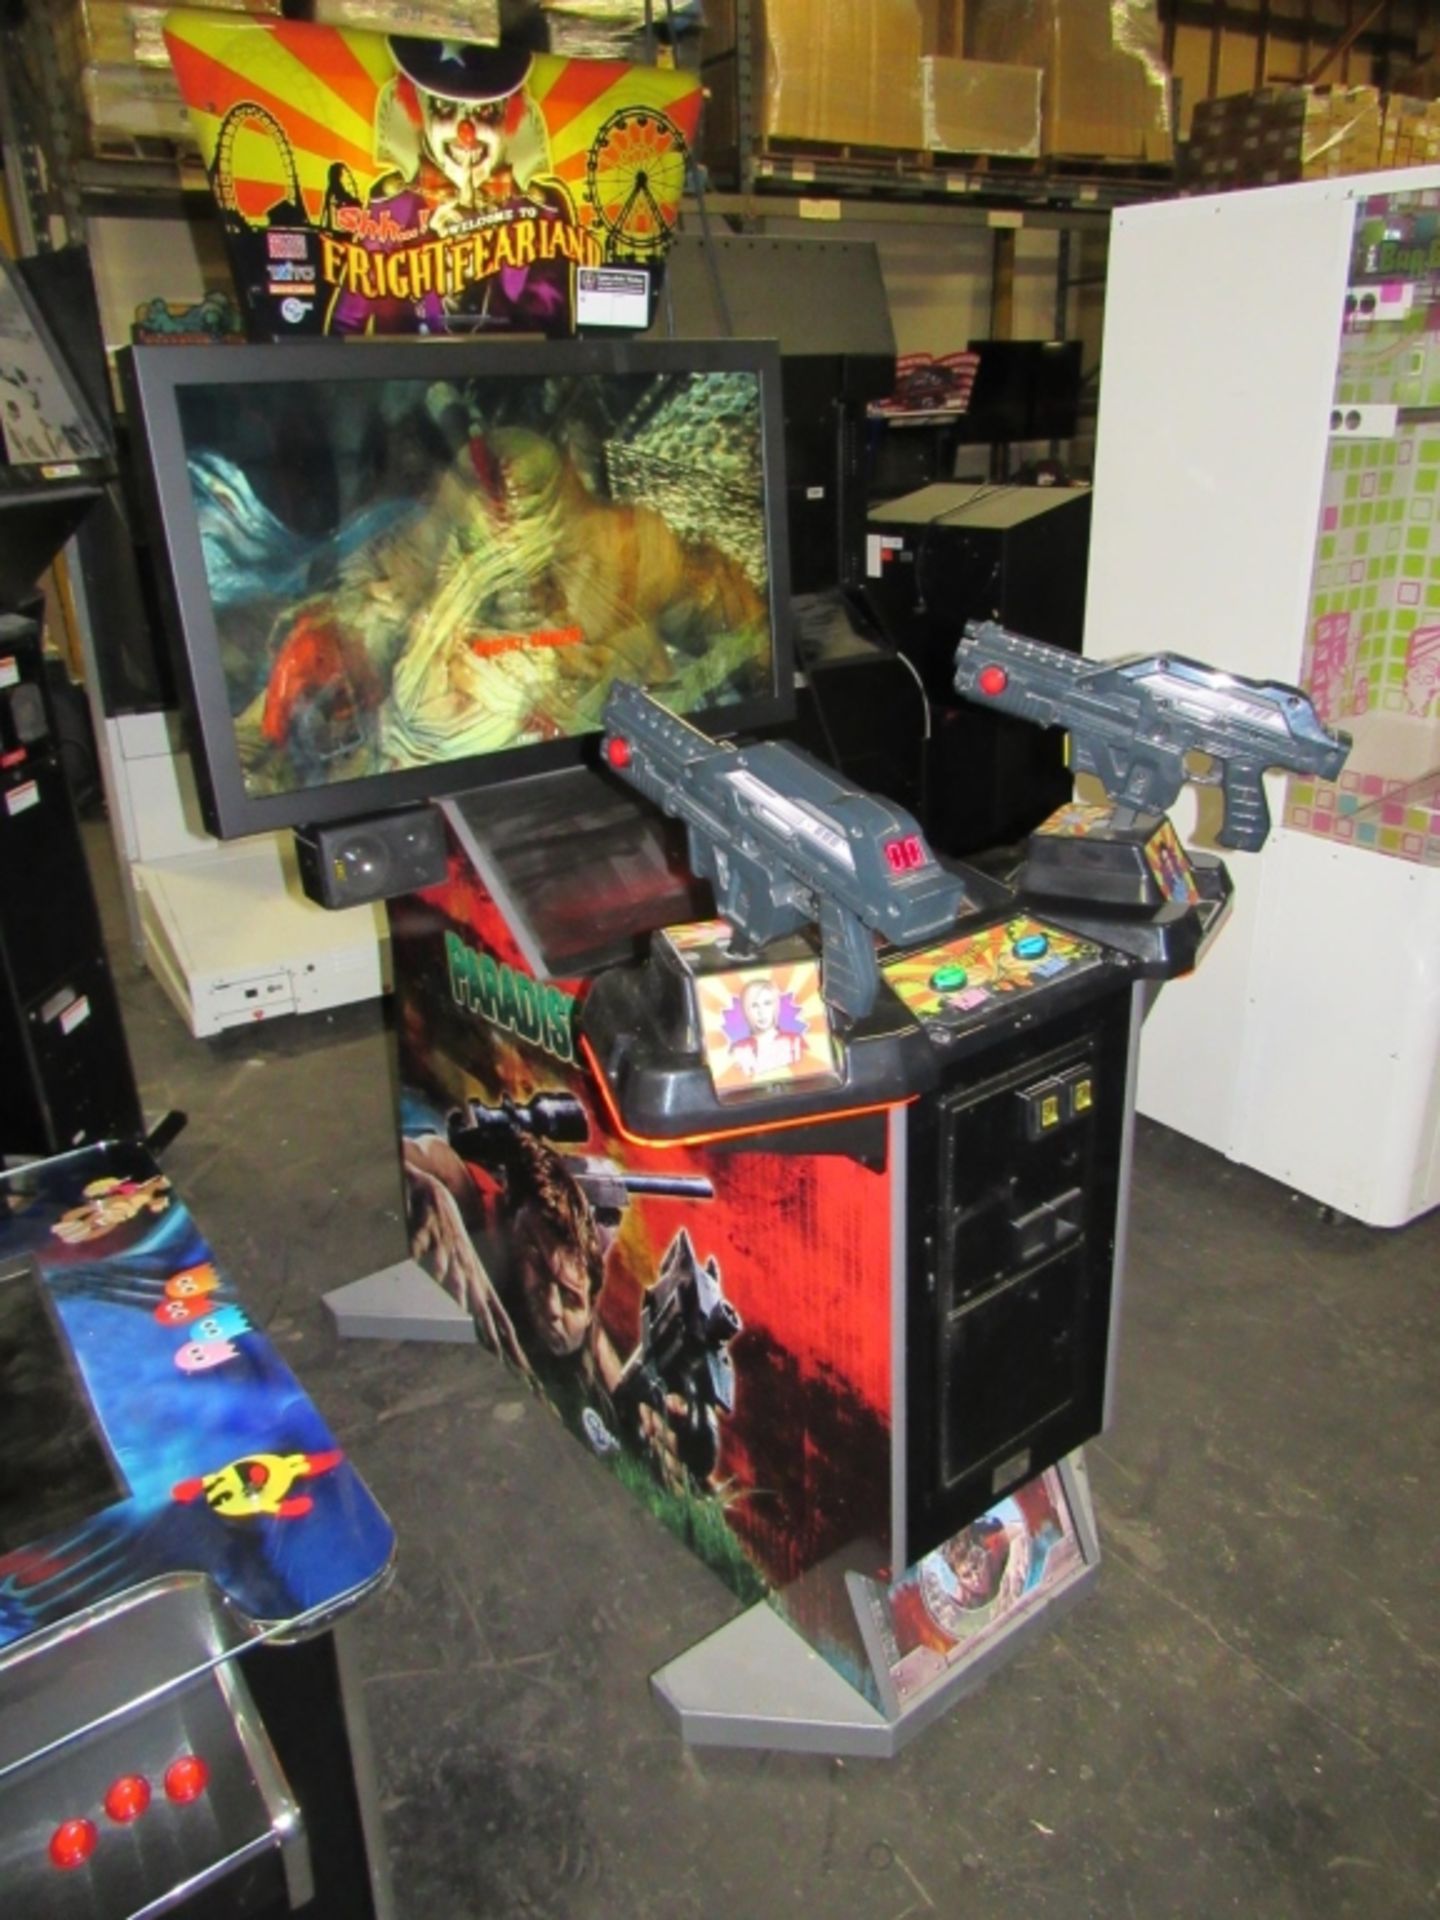 FRIGHT FEARLAND 42" LCD FIXED GUN ARCADE GAME - Image 7 of 7